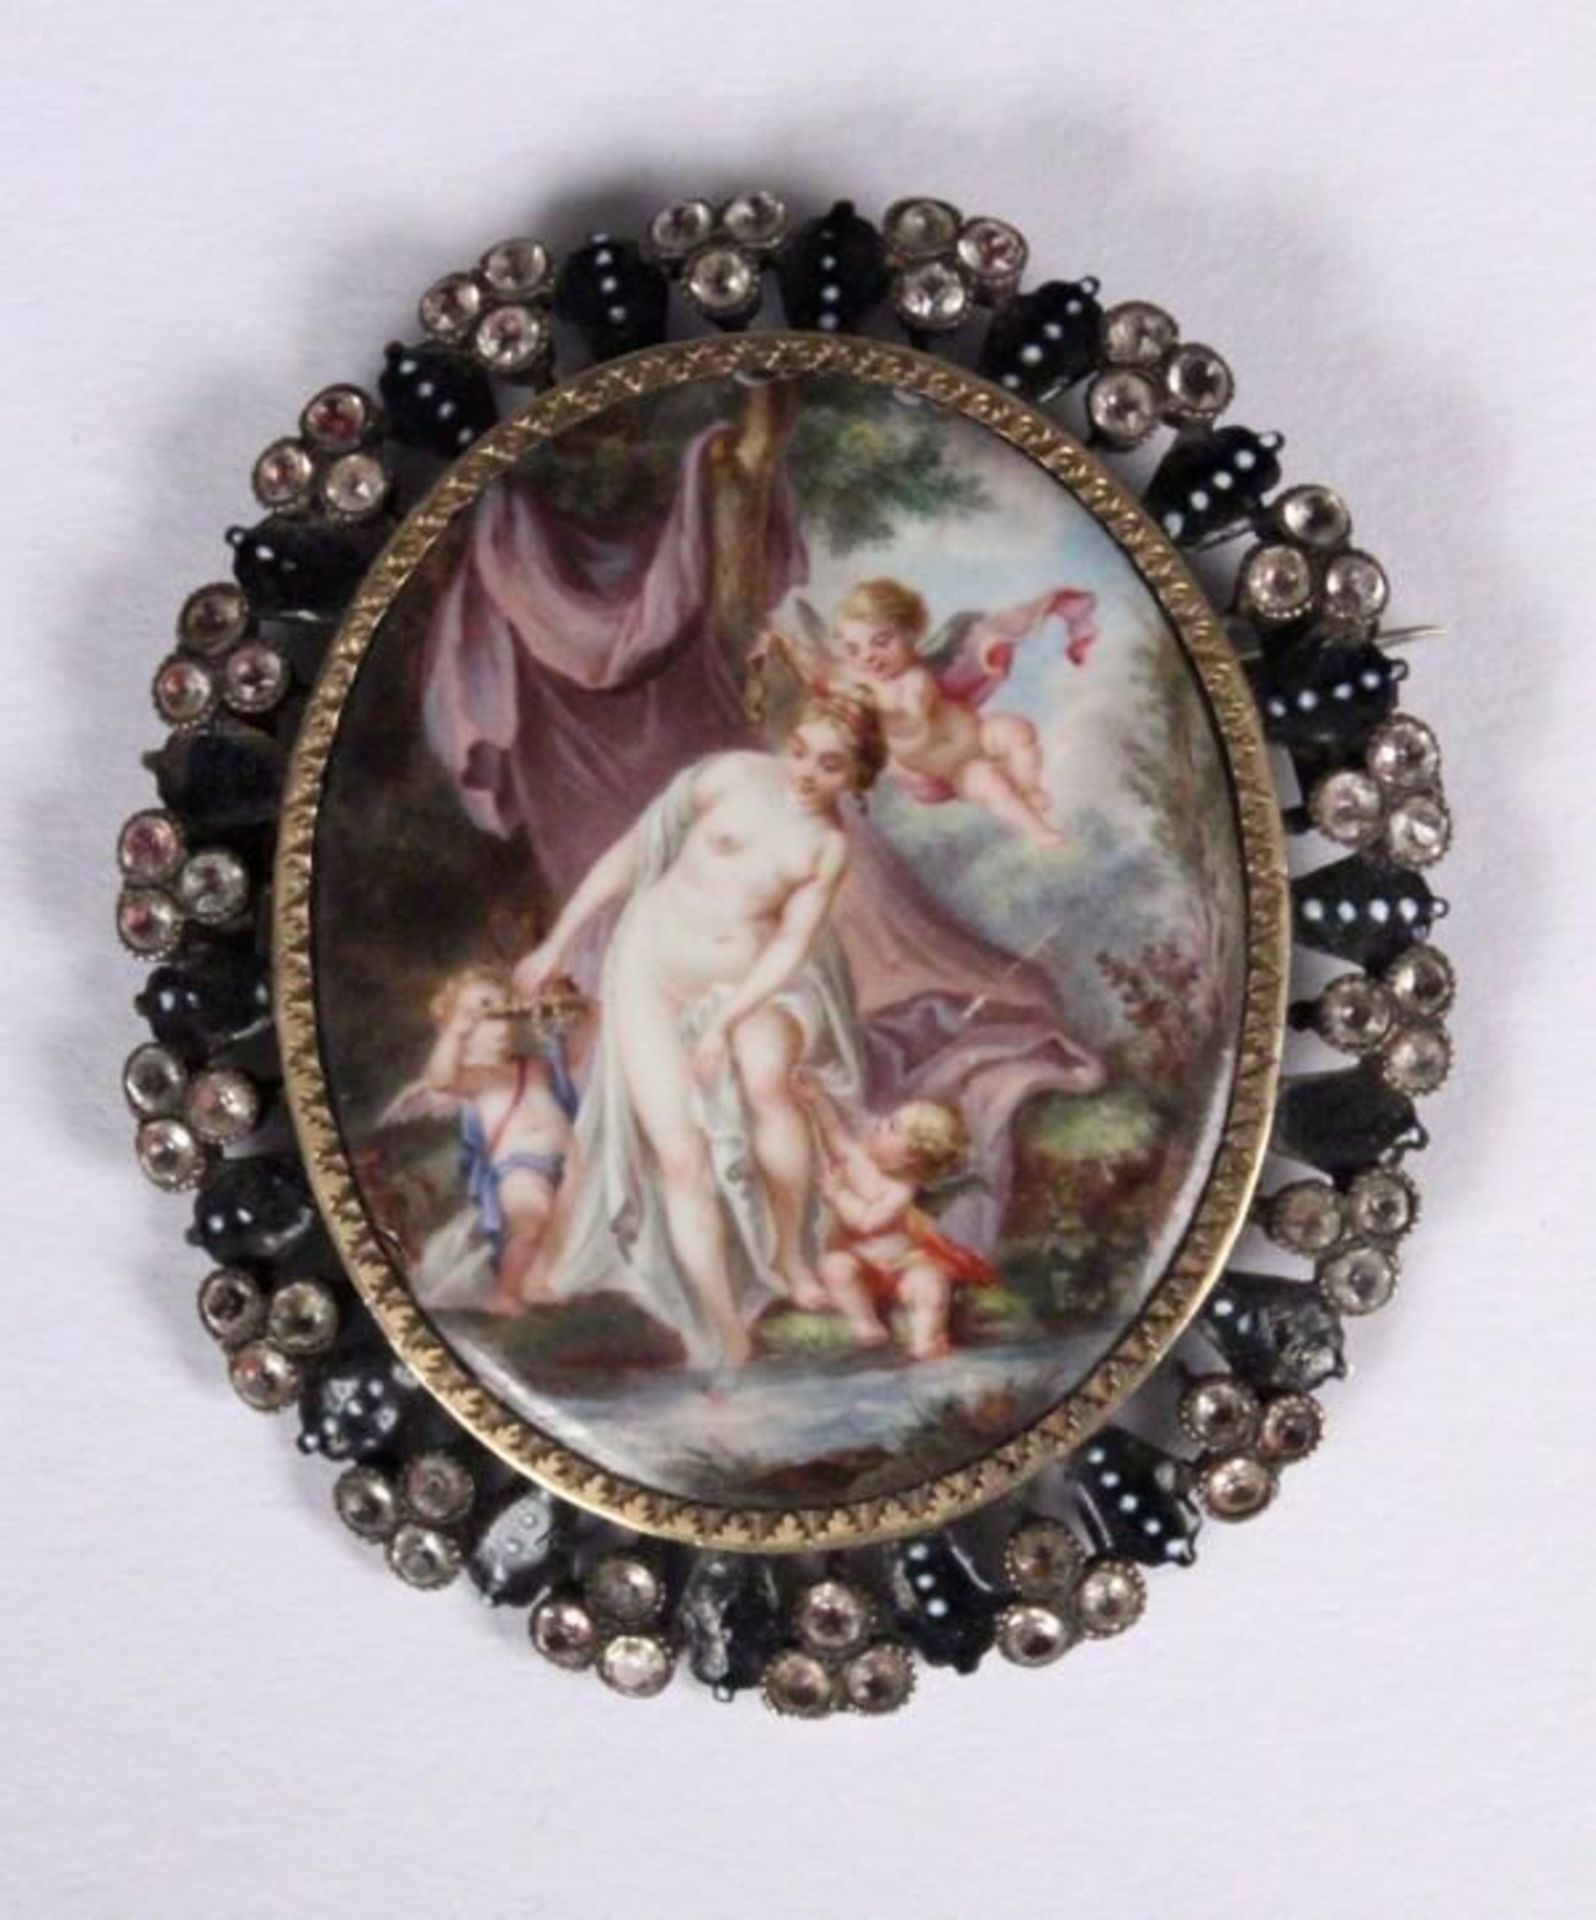 A MINIATURE BROOCH 19th century A colourful painted scene with cherubs and nymphs, enamel, in silver